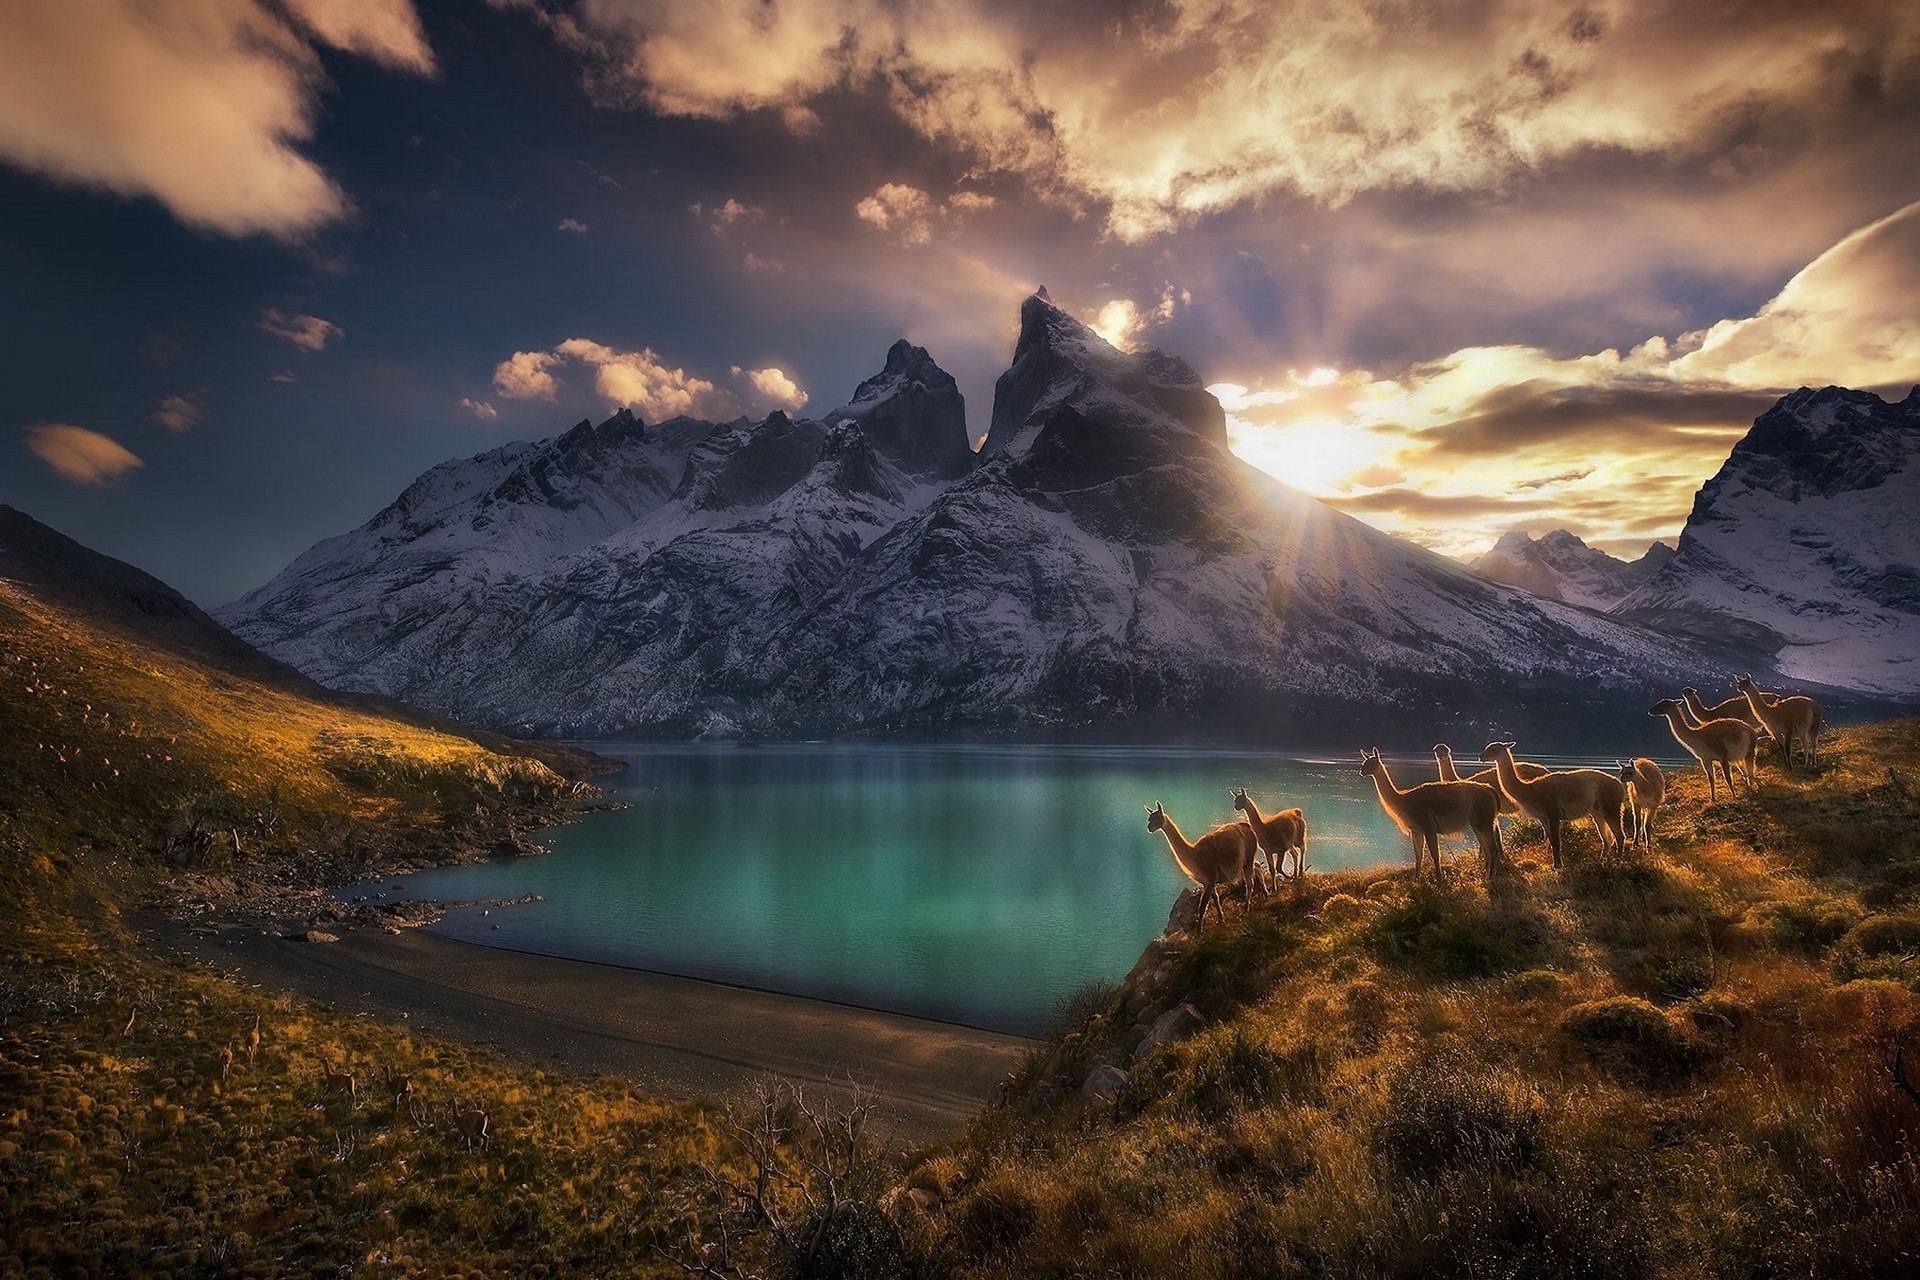 nature, Landscape, Photography, Lake, Mountains, Sunset, Dry Grass, Guanaco, Camelid, Sky, Clouds, Sunlight, Torres Del Paine, Chile Wallpaper